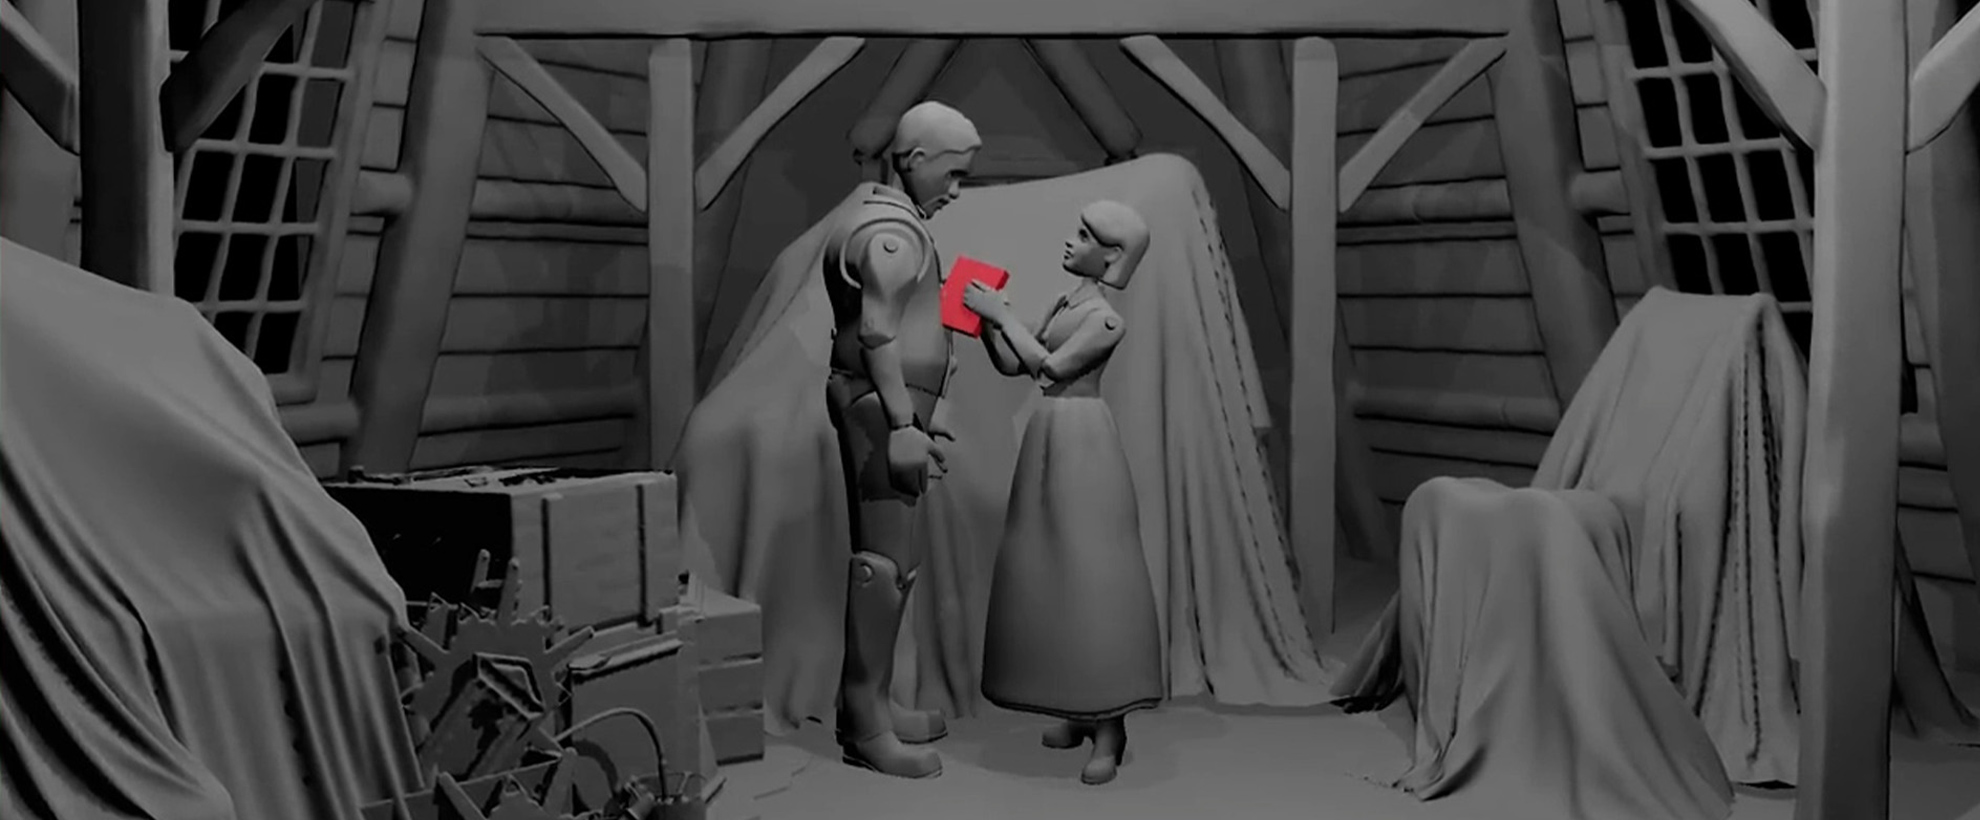 Previs animation on Netflix's Jingle Jangle, showing two people stood facing each other, one holding a red book